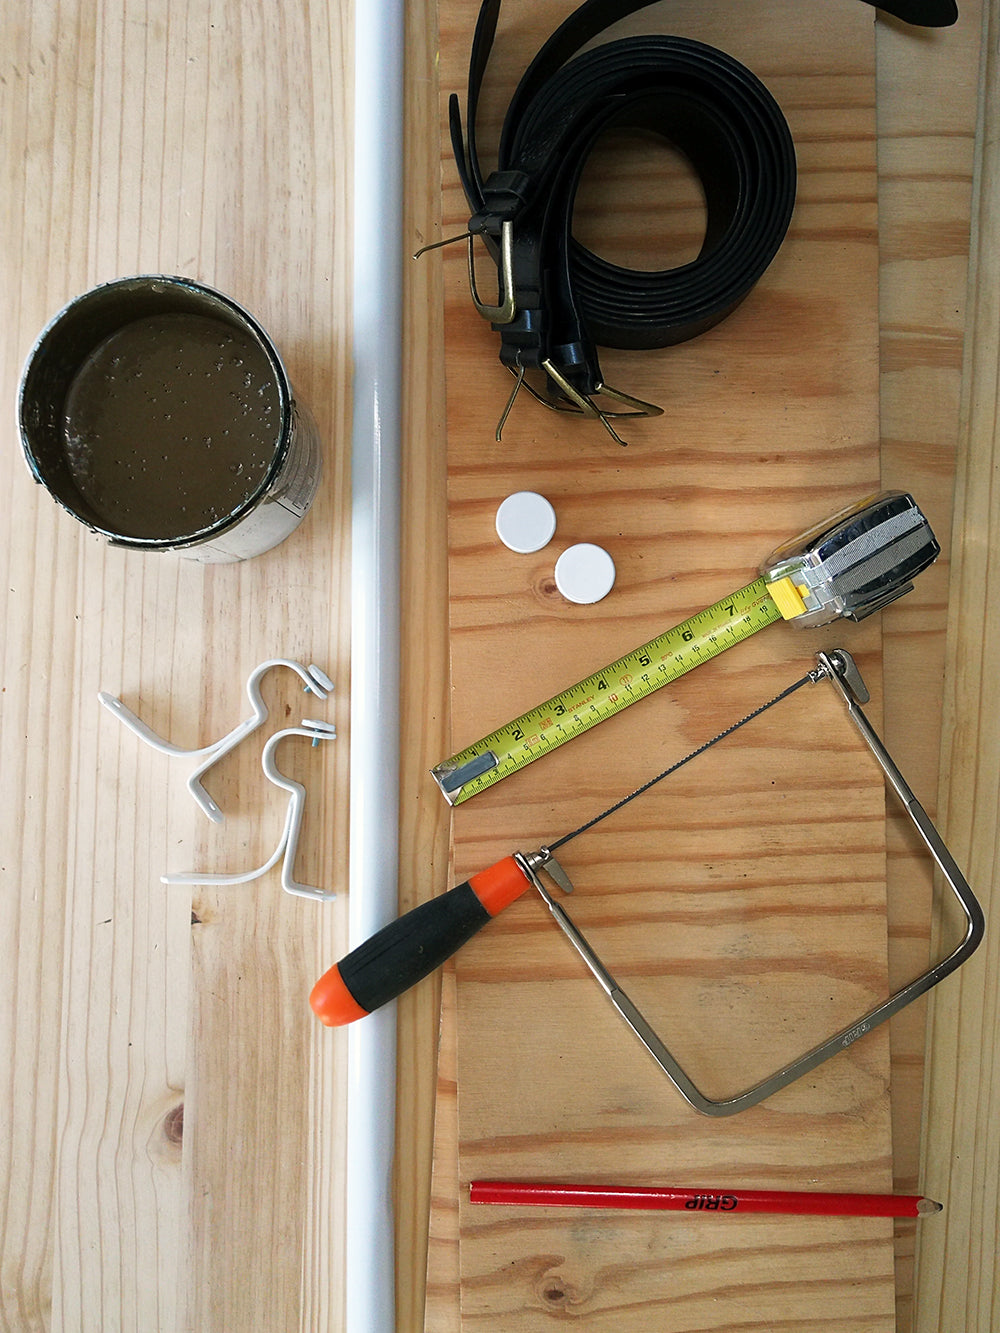 diy hanging shelf materials, including jigsaw, belts, measuring tape, pencil, curtain brackets and plywood